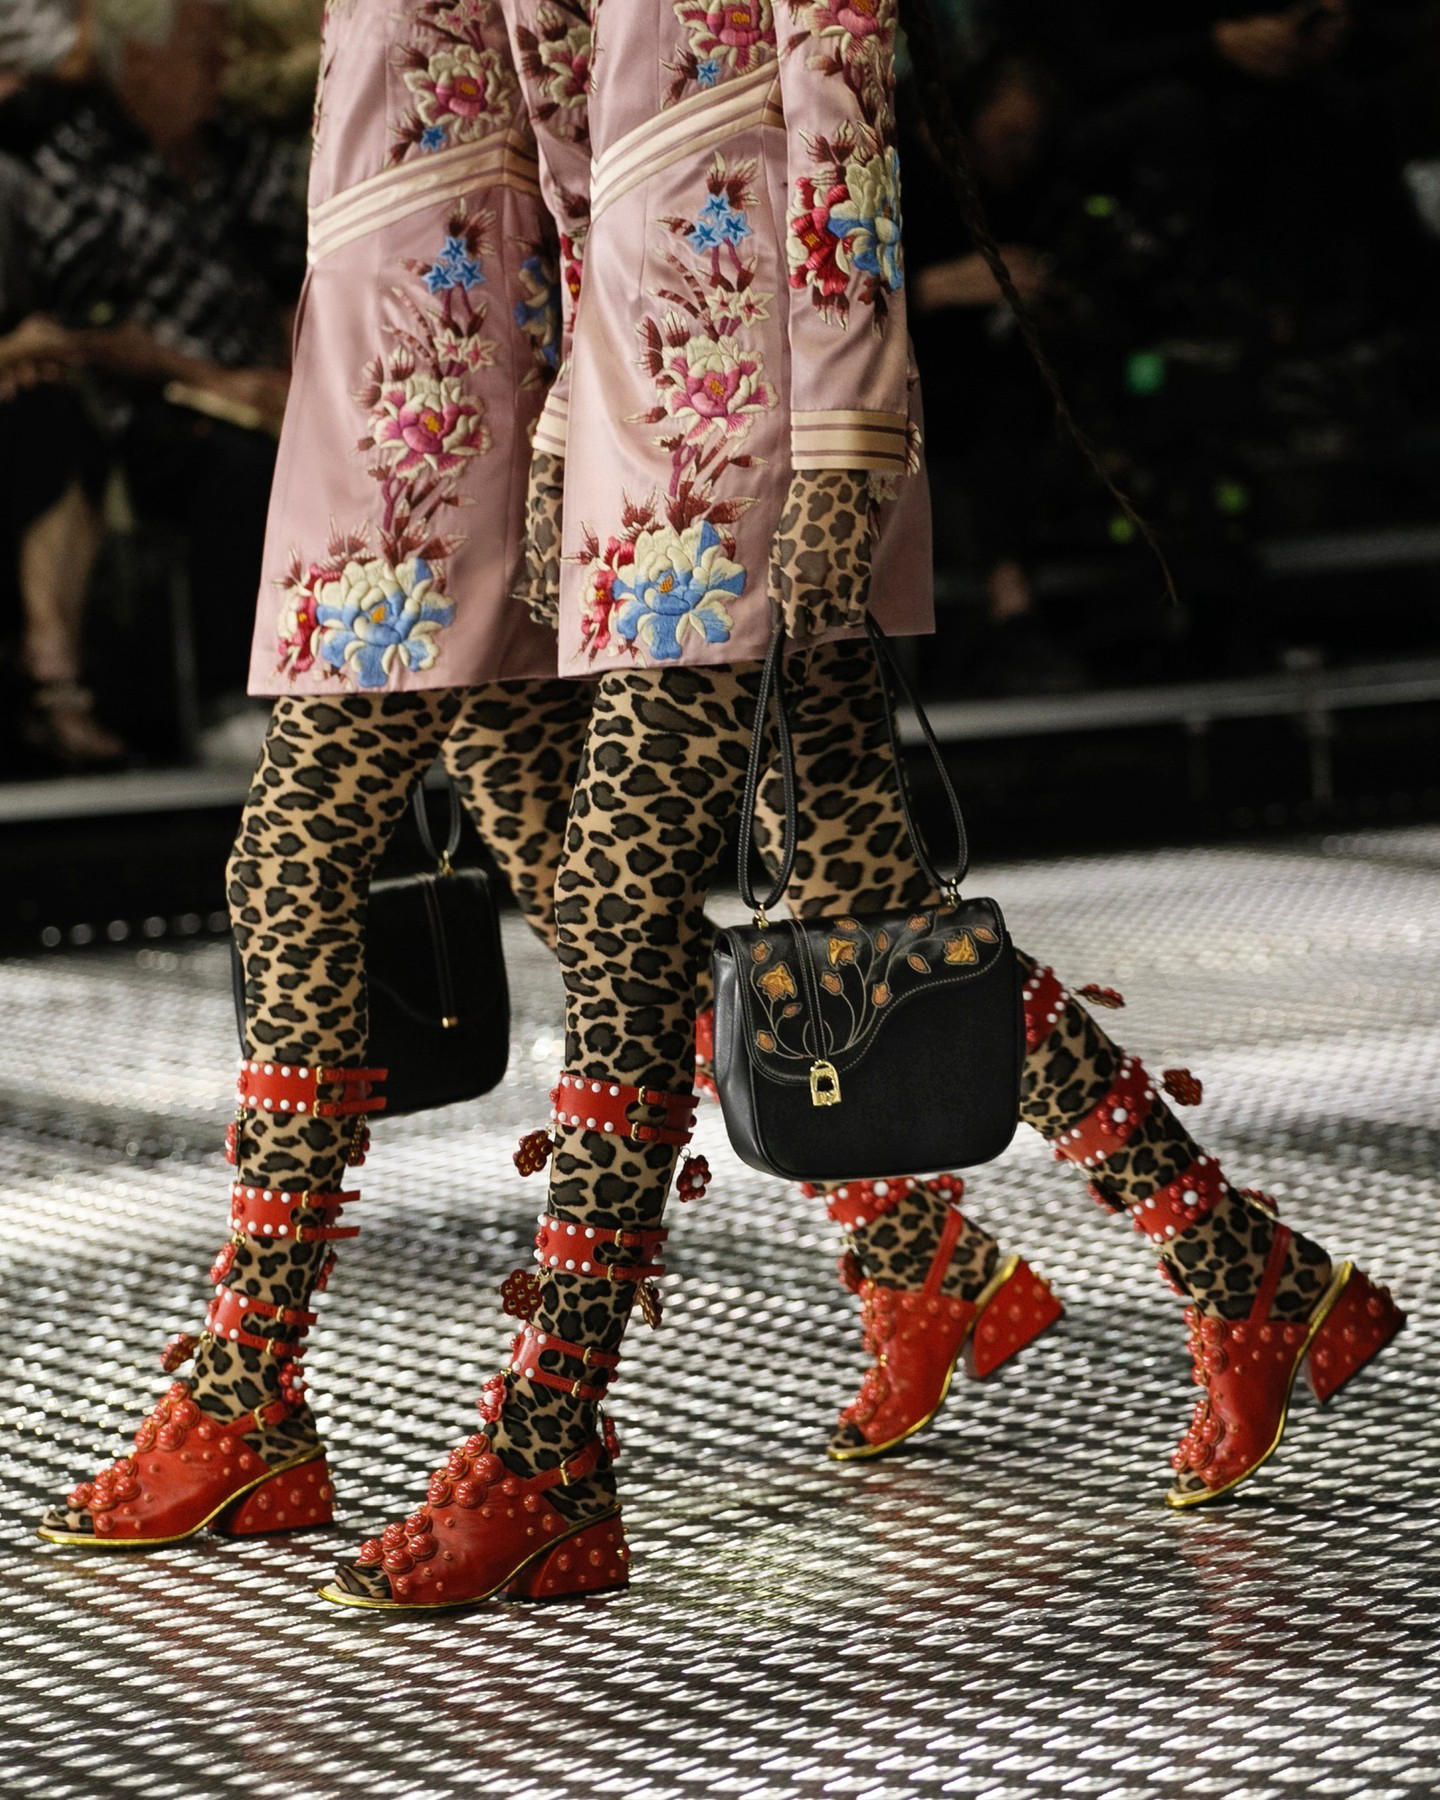 In the collection unveiled during the Gucci Twinsburg fashion show, archival reprisals, a mainstay o